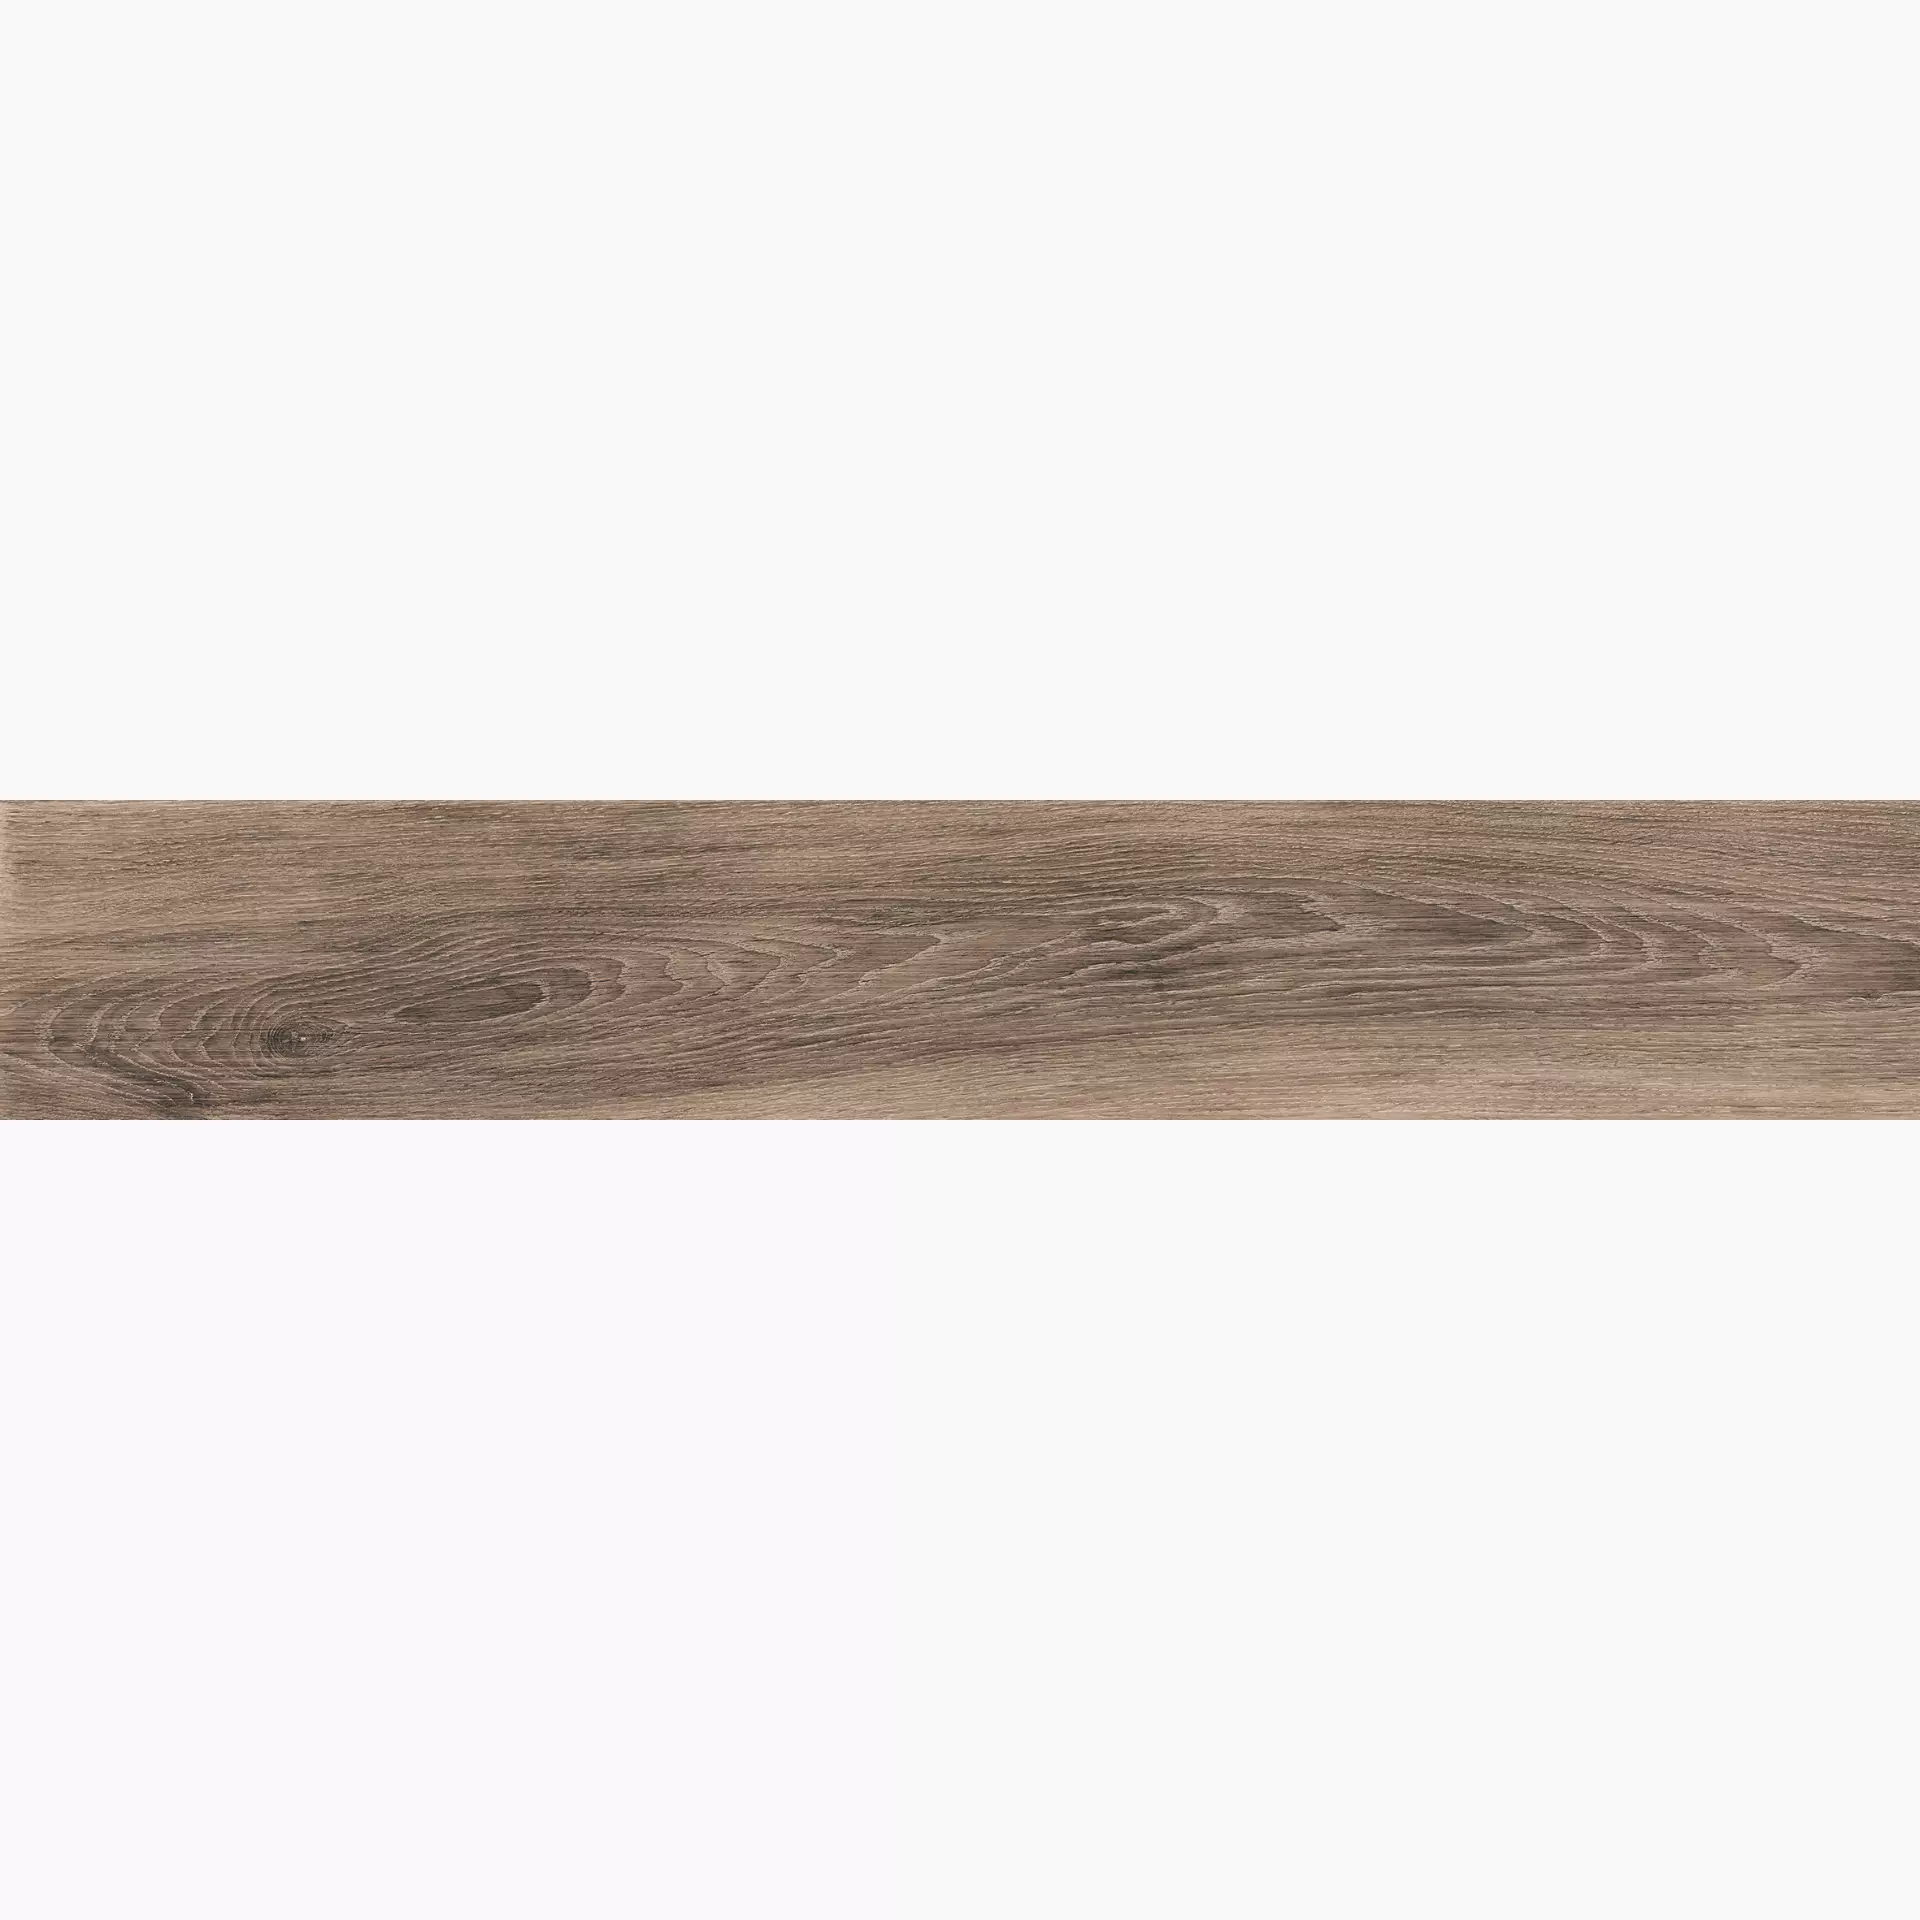 ABK Eco-Chic Avana Naturale PF60004940 20x120cm rectified 8,5mm